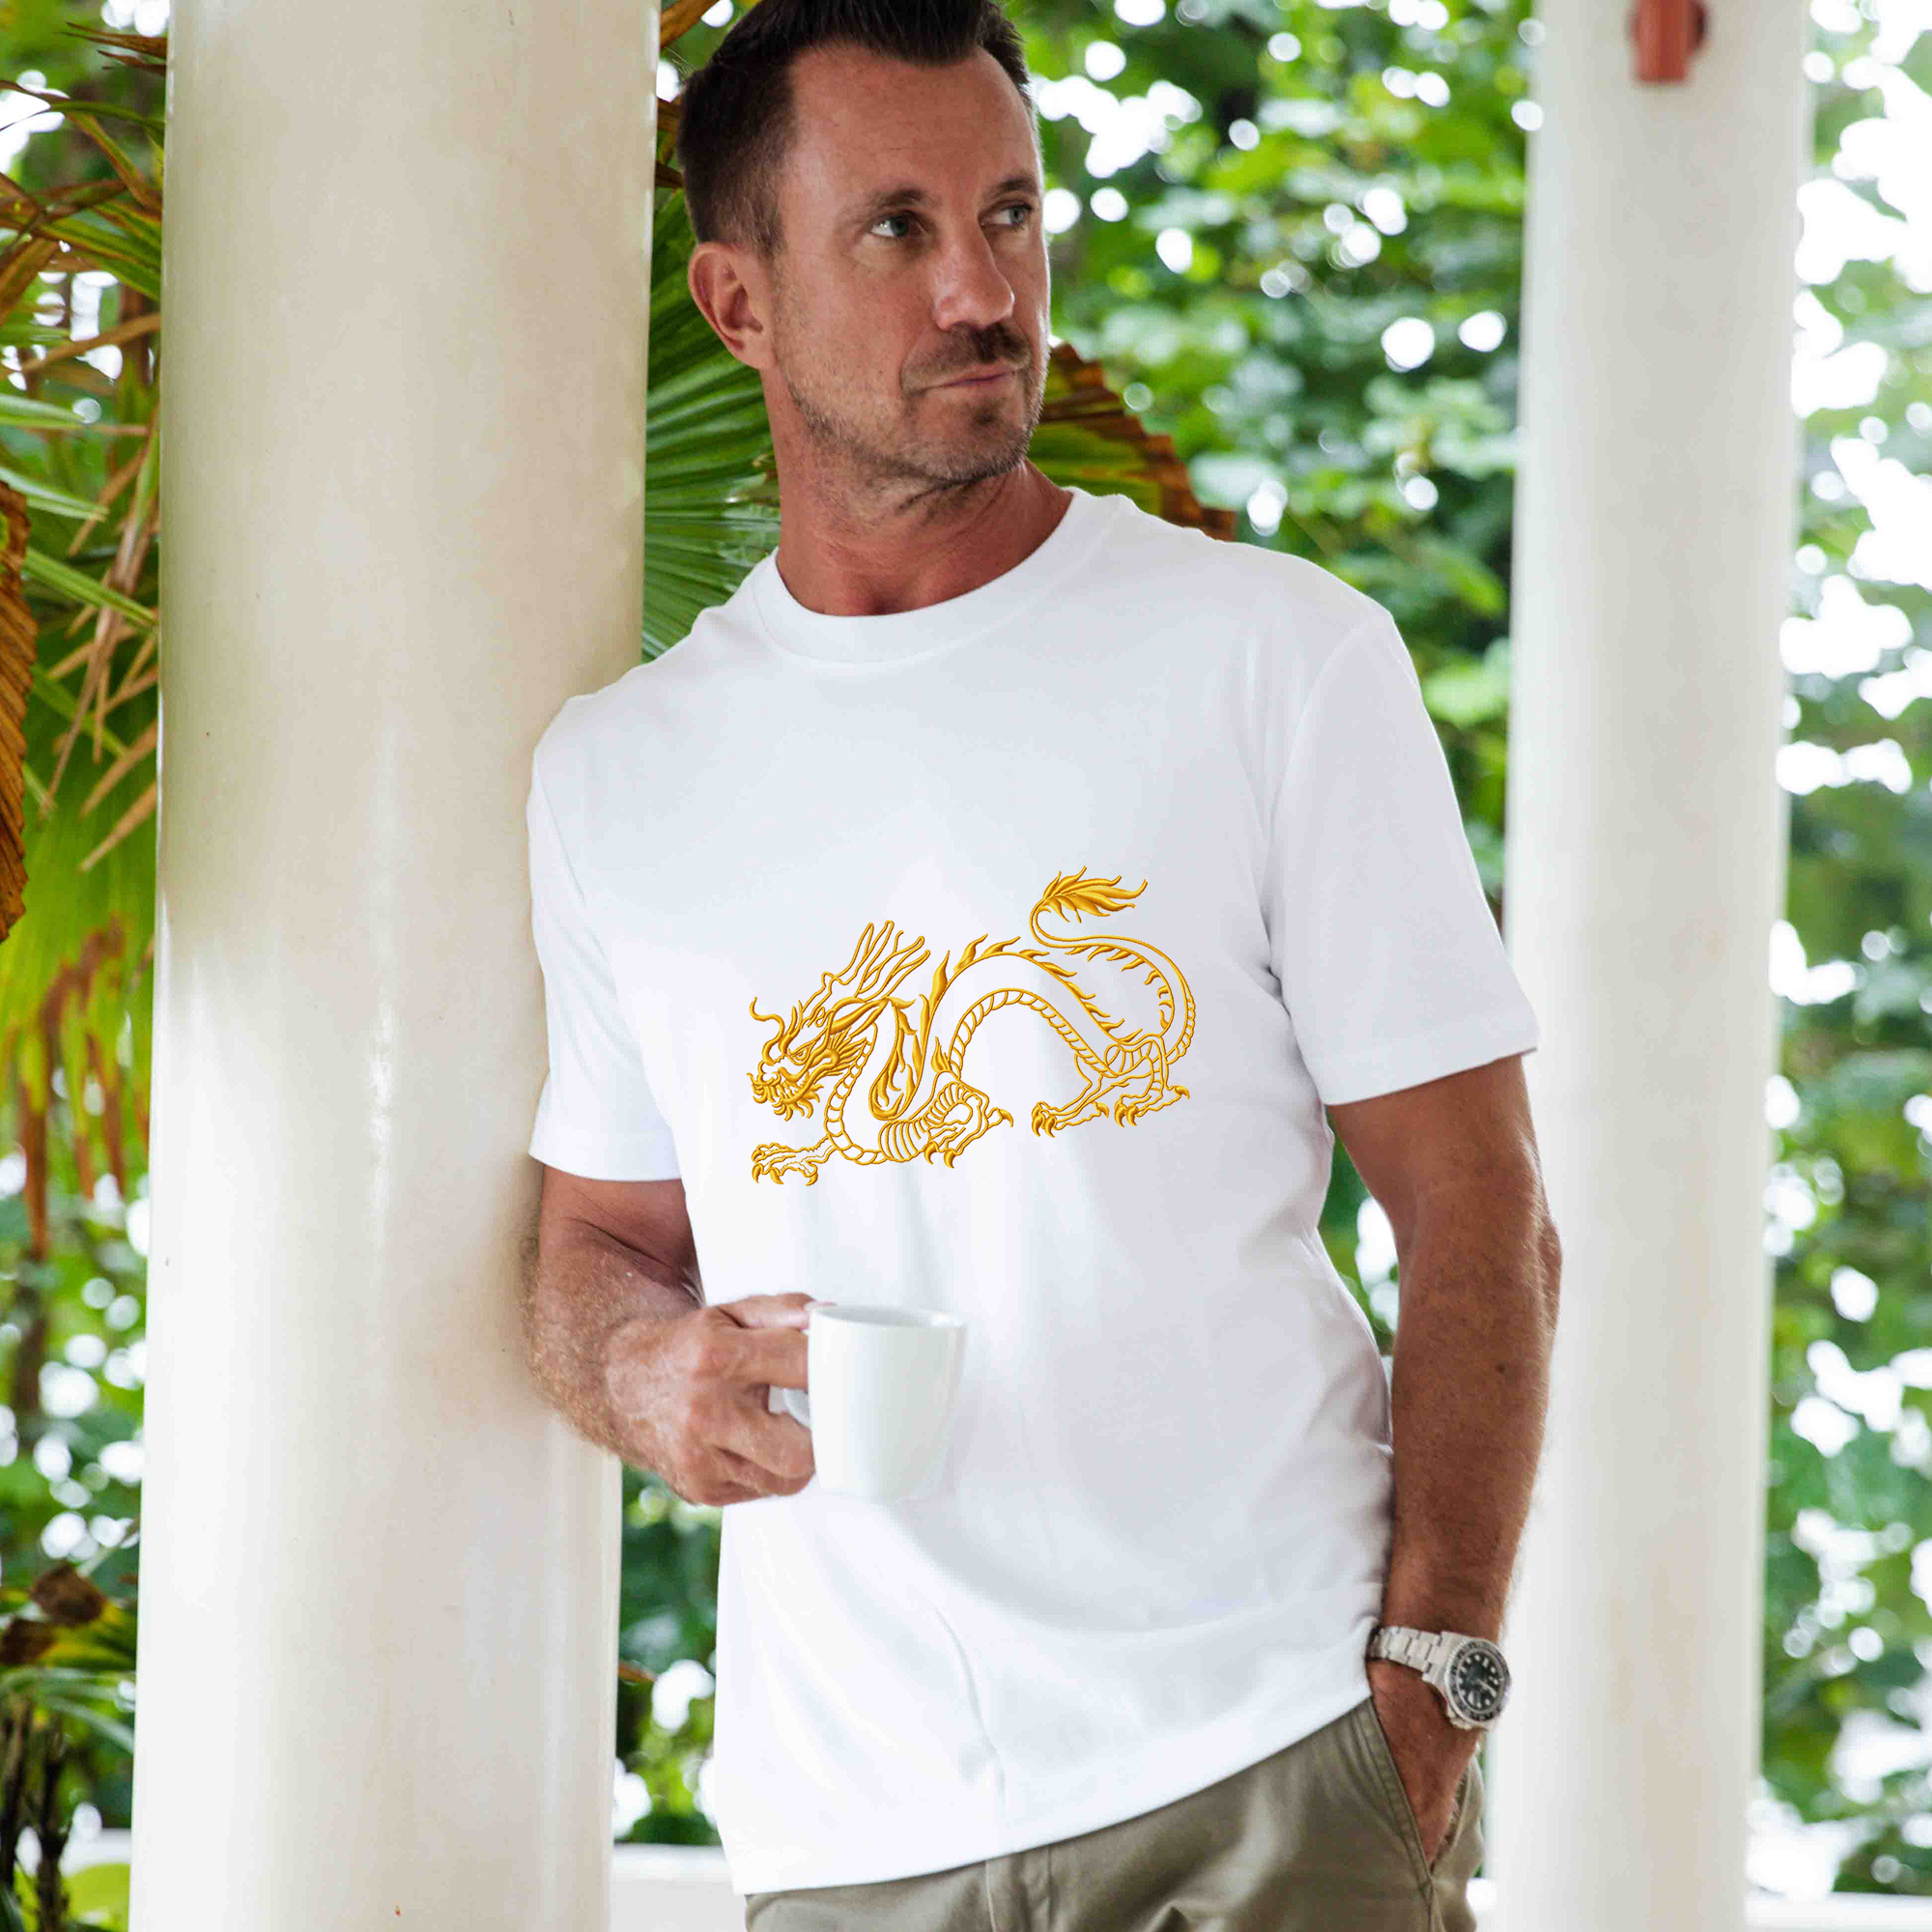 Hawaiian Tee For Men The Year of the Dragon Tee Crew Neck 100% Cotton - WHITE